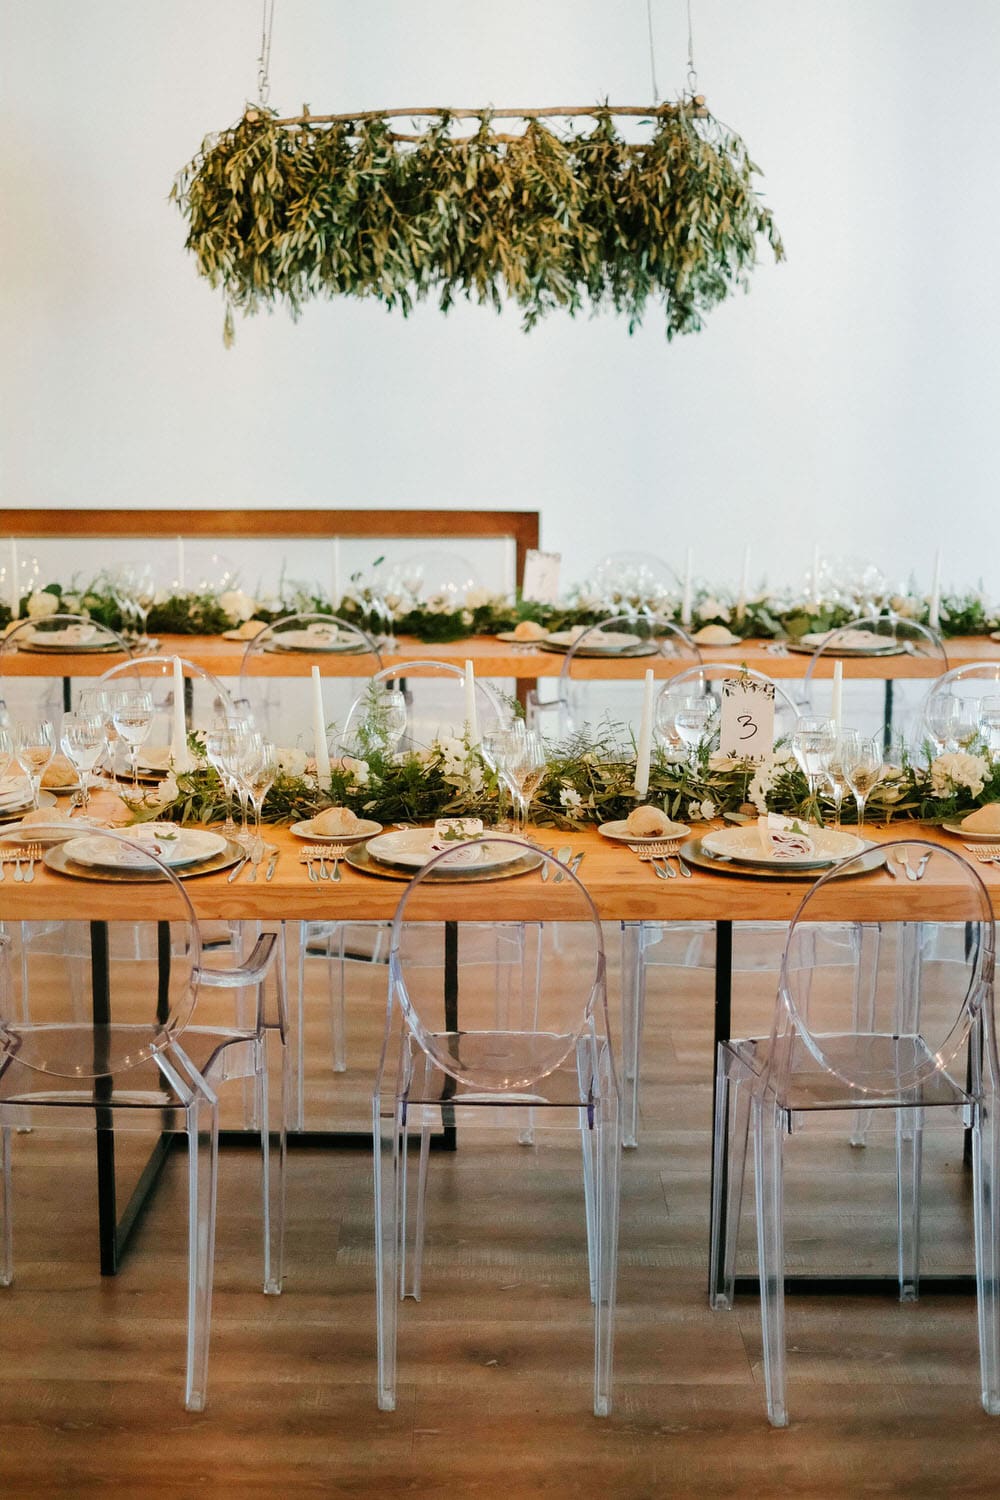 Quinta da Bichinha rustic destination wedding . Elegant wedding hall with symmetrically arranged tables and a vertical garden hanging over the tables in warm tones, complemented by the green of the plants